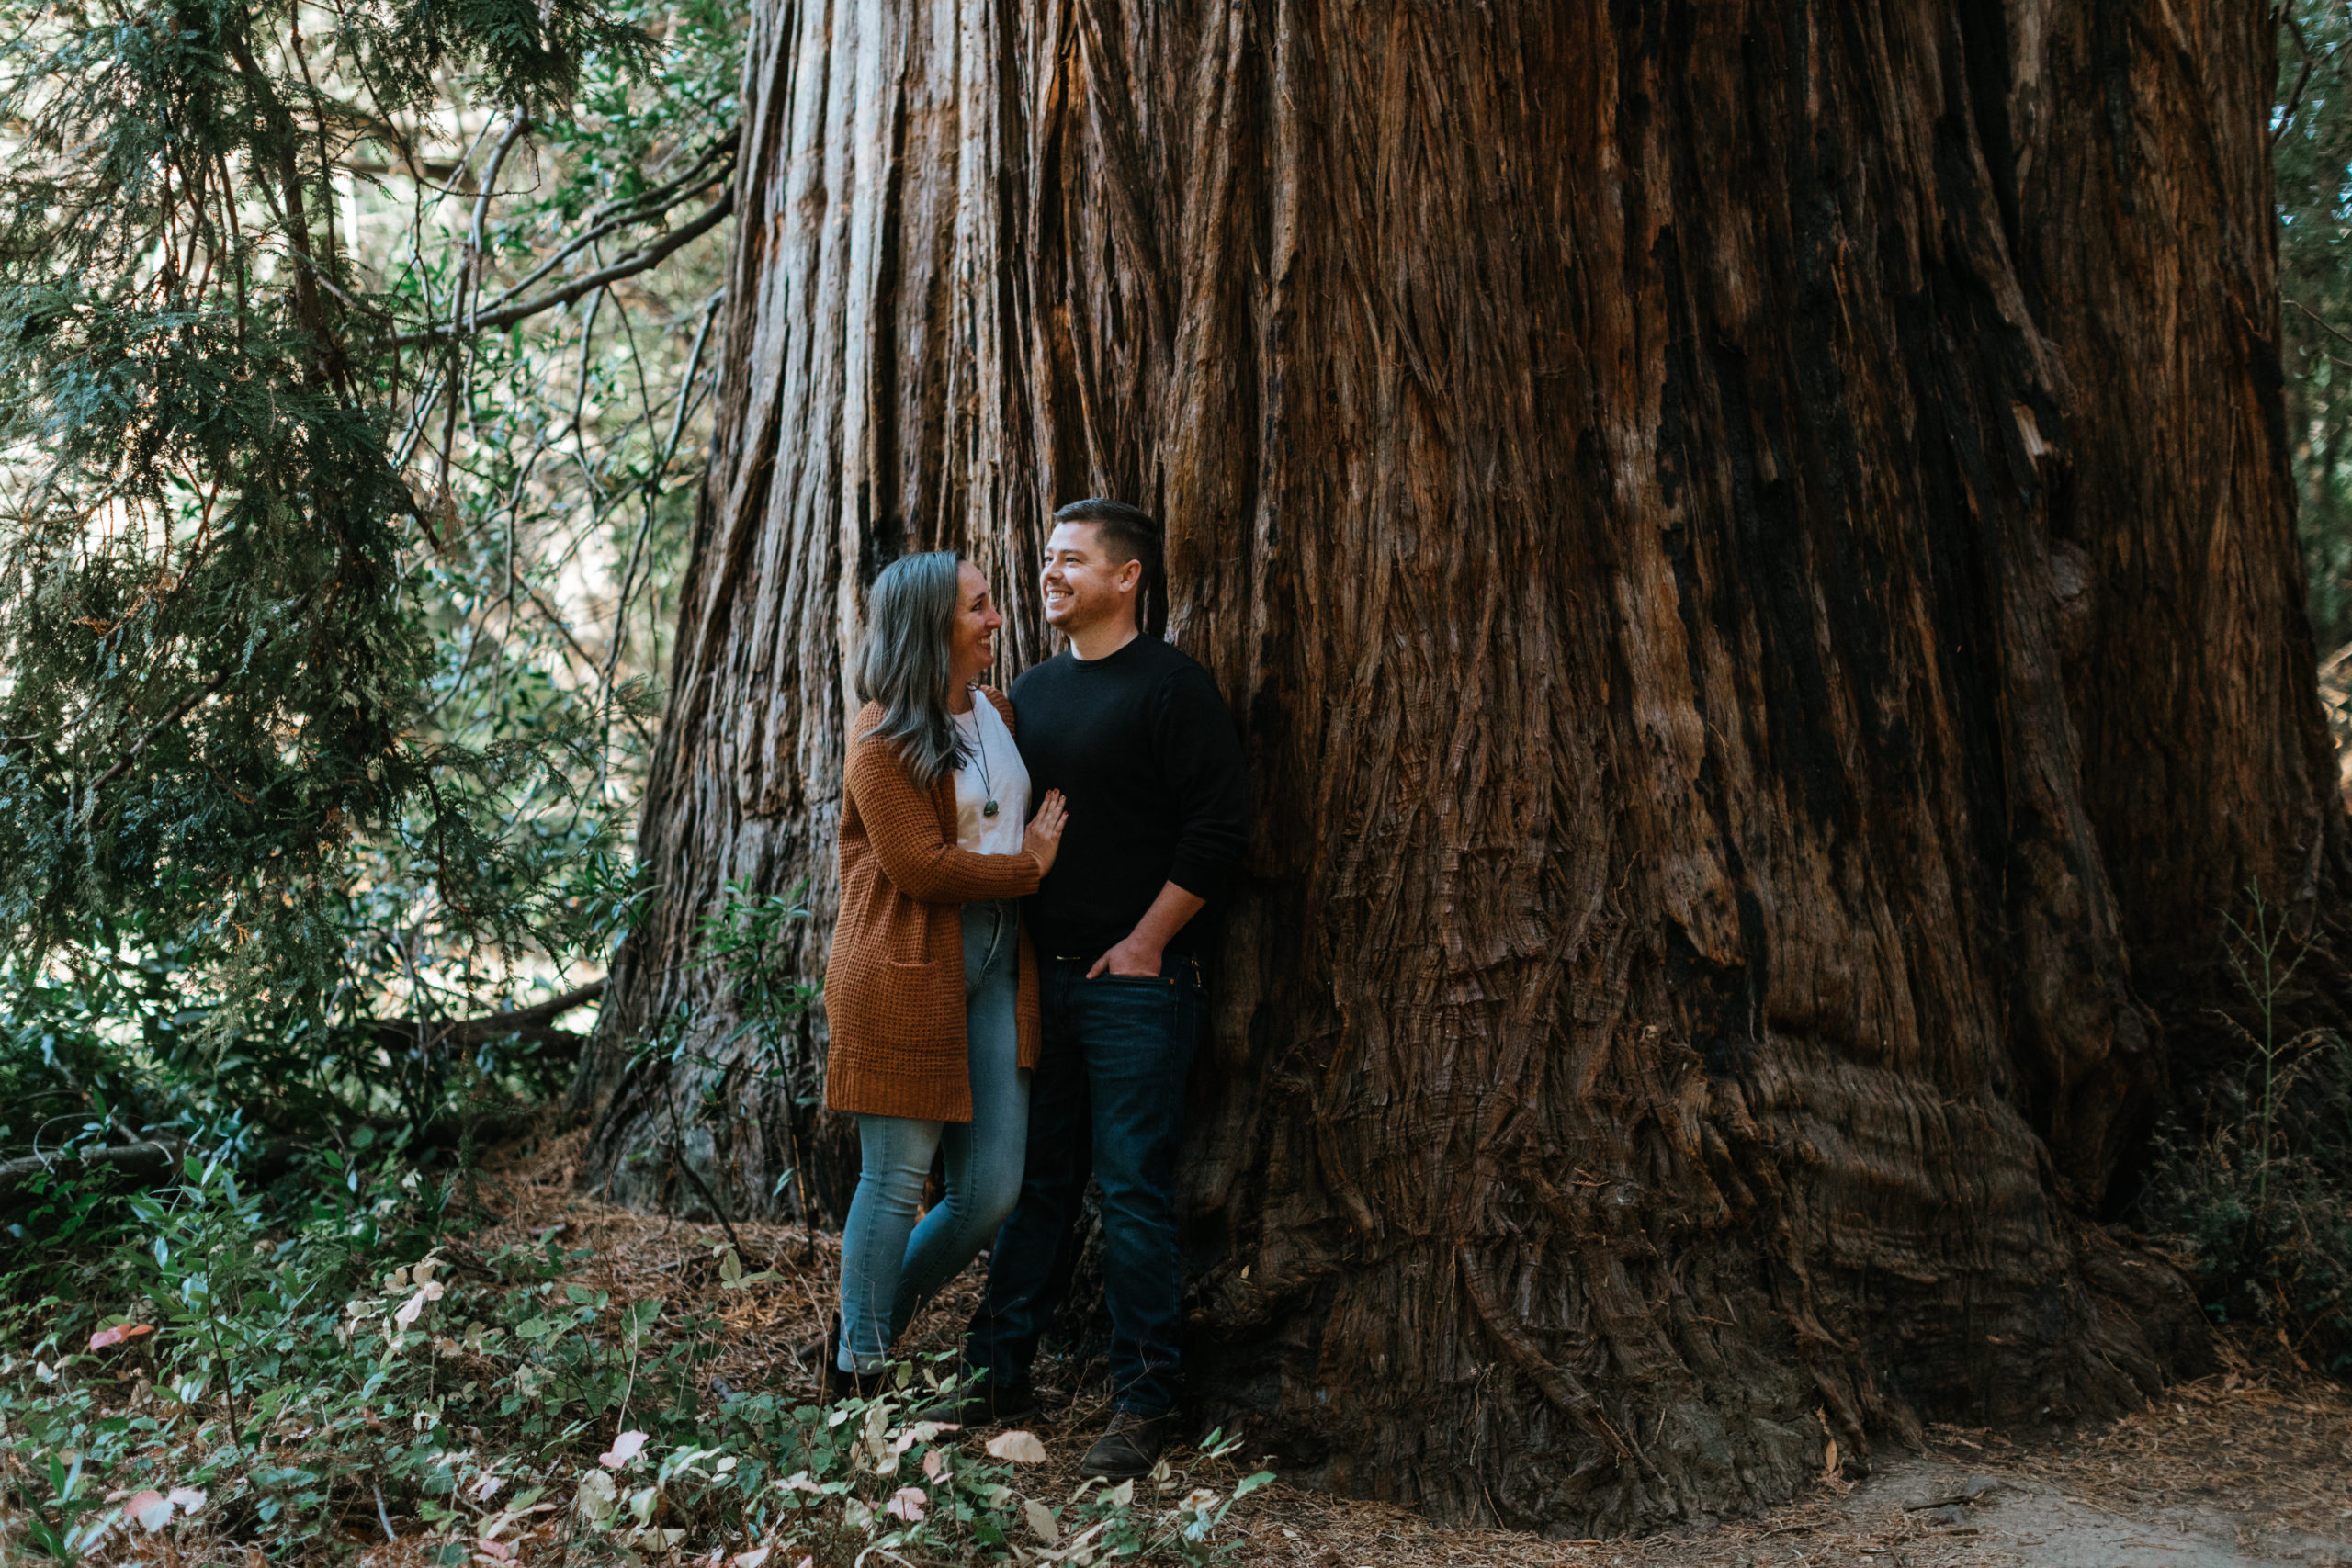 Casey and Will west marin engagement photography session by amy thompson photogtraphy